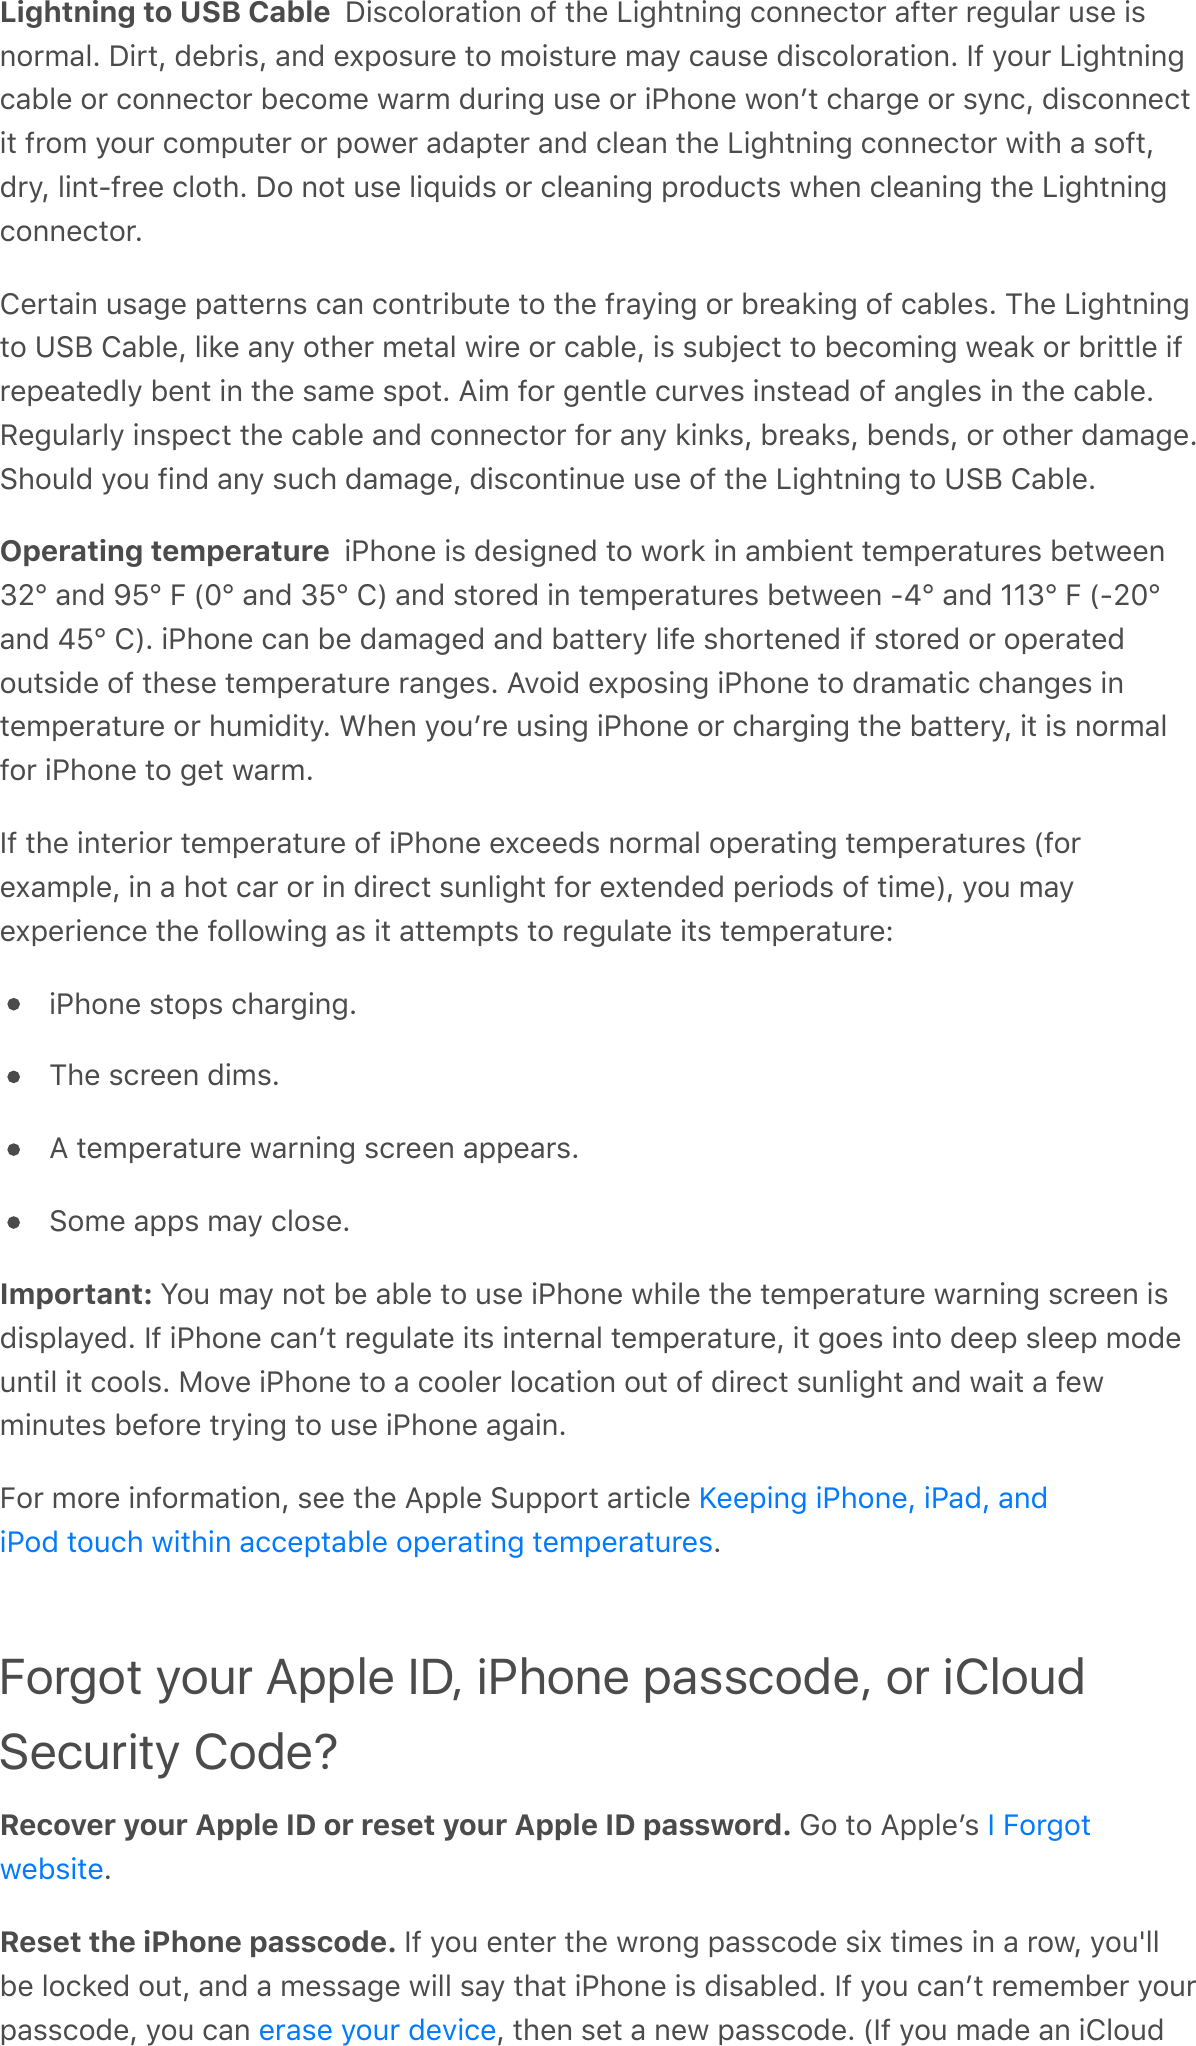 Lightning to USB Cable  !()9&quot;?&quot;,-%(&quot;#&amp;&quot;8&amp;%1.&amp;=(51%#(#5&amp;9&quot;##.9%&quot;,&amp;-8%.,&amp;,.50?-,&amp;0).&amp;()#&quot;,&apos;-?A&amp;!(,%L&amp;&lt;.@,()L&amp;-#&lt;&amp;.`6&quot;)0,.&amp;%&quot;&amp;&apos;&quot;()%0,.&amp;&apos;-/&amp;9-0).&amp;&lt;()9&quot;?&quot;,-%(&quot;#A&amp;Q8&amp;/&quot;0,&amp;=(51%#(#59-@?.&amp;&quot;,&amp;9&quot;##.9%&quot;,&amp;@.9&quot;&apos;.&amp;H-,&apos;&amp;&lt;0,(#5&amp;0).&amp;&quot;,&amp;(71&quot;#.&amp;H&quot;#$%&amp;91-,5.&amp;&quot;,&amp;)/#9L&amp;&lt;()9&quot;##.9%(%&amp;8,&quot;&apos;&amp;/&quot;0,&amp;9&quot;&apos;60%.,&amp;&quot;,&amp;6&quot;H.,&amp;-&lt;-6%.,&amp;-#&lt;&amp;9?.-#&amp;%1.&amp;=(51%#(#5&amp;9&quot;##.9%&quot;,&amp;H(%1&amp;-&amp;)&quot;8%L&lt;,/L&amp;?(#%T8,..&amp;9?&quot;%1A&amp;!&quot;&amp;#&quot;%&amp;0).&amp;?(c0(&lt;)&amp;&quot;,&amp;9?.-#(#5&amp;6,&quot;&lt;09%)&amp;H1.#&amp;9?.-#(#5&amp;%1.&amp;=(51%#(#59&quot;##.9%&quot;,AO.,%-(#&amp;0)-5.&amp;6-%%.,#)&amp;9-#&amp;9&quot;#%,(@0%.&amp;%&quot;&amp;%1.&amp;8,-/(#5&amp;&quot;,&amp;@,.-3(#5&amp;&quot;8&amp;9-@?.)A&amp;21.&amp;=(51%#(#5%&quot;&amp;\EK&amp;O-@?.L&amp;?(3.&amp;-#/&amp;&quot;%1.,&amp;&apos;.%-?&amp;H(,.&amp;&quot;,&amp;9-@?.L&amp;()&amp;)0@[.9%&amp;%&quot;&amp;@.9&quot;&apos;(#5&amp;H.-3&amp;&quot;,&amp;@,(%%?.&amp;(8,.6.-%.&lt;?/&amp;@.#%&amp;(#&amp;%1.&amp;)-&apos;.&amp;)6&quot;%A&amp;;(&apos;&amp;8&quot;,&amp;5.#%?.&amp;90,:.)&amp;(#)%.-&lt;&amp;&quot;8&amp;-#5?.)&amp;(#&amp;%1.&amp;9-@?.AC.50?-,?/&amp;(#)6.9%&amp;%1.&amp;9-@?.&amp;-#&lt;&amp;9&quot;##.9%&quot;,&amp;8&quot;,&amp;-#/&amp;3(#3)L&amp;@,.-3)L&amp;@.#&lt;)L&amp;&quot;,&amp;&quot;%1.,&amp;&lt;-&apos;-5.AE1&quot;0?&lt;&amp;/&quot;0&amp;8(#&lt;&amp;-#/&amp;)091&amp;&lt;-&apos;-5.L&amp;&lt;()9&quot;#%(#0.&amp;0).&amp;&quot;8&amp;%1.&amp;=(51%#(#5&amp;%&quot;&amp;\EK&amp;O-@?.AOperating temperature  (71&quot;#.&amp;()&amp;&lt;.)(5#.&lt;&amp;%&quot;&amp;H&quot;,3&amp;(#&amp;-&apos;@(.#%&amp;%.&apos;6.,-%0,.)&amp;@.%H..#]jz&amp;-#&lt;&amp;qZz&amp;+&amp;^oz&amp;-#&lt;&amp;]Zz&amp;O_&amp;-#&lt;&amp;)%&quot;,.&lt;&amp;(#&amp;%.&apos;6.,-%0,.)&amp;@.%H..#&amp;Tkz&amp;-#&lt;&amp;JJ]z&amp;+&amp;^Tjoz-#&lt;&amp;kZz&amp;O_A&amp;(71&quot;#.&amp;9-#&amp;@.&amp;&lt;-&apos;-5.&lt;&amp;-#&lt;&amp;@-%%.,/&amp;?(8.&amp;)1&quot;,%.#.&lt;&amp;(8&amp;)%&quot;,.&lt;&amp;&quot;,&amp;&quot;6.,-%.&lt;&quot;0%)(&lt;.&amp;&quot;8&amp;%1.).&amp;%.&apos;6.,-%0,.&amp;,-#5.)A&amp;;:&quot;(&lt;&amp;.`6&quot;)(#5&amp;(71&quot;#.&amp;%&quot;&amp;&lt;,-&apos;-%(9&amp;91-#5.)&amp;(#%.&apos;6.,-%0,.&amp;&quot;,&amp;10&apos;(&lt;(%/A&amp;F1.#&amp;/&quot;0$,.&amp;0)(#5&amp;(71&quot;#.&amp;&quot;,&amp;91-,5(#5&amp;%1.&amp;@-%%.,/L&amp;(%&amp;()&amp;#&quot;,&apos;-?8&quot;,&amp;(71&quot;#.&amp;%&quot;&amp;5.%&amp;H-,&apos;AQ8&amp;%1.&amp;(#%.,(&quot;,&amp;%.&apos;6.,-%0,.&amp;&quot;8&amp;(71&quot;#.&amp;.`9..&lt;)&amp;#&quot;,&apos;-?&amp;&quot;6.,-%(#5&amp;%.&apos;6.,-%0,.)&amp;^8&quot;,.`-&apos;6?.L&amp;(#&amp;-&amp;1&quot;%&amp;9-,&amp;&quot;,&amp;(#&amp;&lt;(,.9%&amp;)0#?(51%&amp;8&quot;,&amp;.`%.#&lt;.&lt;&amp;6.,(&quot;&lt;)&amp;&quot;8&amp;%(&apos;._L&amp;/&quot;0&amp;&apos;-/.`6.,(.#9.&amp;%1.&amp;8&quot;??&quot;H(#5&amp;-)&amp;(%&amp;-%%.&apos;6%)&amp;%&quot;&amp;,.50?-%.&amp;(%)&amp;%.&apos;6.,-%0,.M(71&quot;#.&amp;)%&quot;6)&amp;91-,5(#5A21.&amp;)9,..#&amp;&lt;(&apos;)A;&amp;%.&apos;6.,-%0,.&amp;H-,#(#5&amp;)9,..#&amp;-66.-,)AE&quot;&apos;.&amp;-66)&amp;&apos;-/&amp;9?&quot;).AImportant: N&quot;0&amp;&apos;-/&amp;#&quot;%&amp;@.&amp;-@?.&amp;%&quot;&amp;0).&amp;(71&quot;#.&amp;H1(?.&amp;%1.&amp;%.&apos;6.,-%0,.&amp;H-,#(#5&amp;)9,..#&amp;()&lt;()6?-/.&lt;A&amp;Q8&amp;(71&quot;#.&amp;9-#$%&amp;,.50?-%.&amp;(%)&amp;(#%.,#-?&amp;%.&apos;6.,-%0,.L&amp;(%&amp;5&quot;.)&amp;(#%&quot;&amp;&lt;..6&amp;)?..6&amp;&apos;&quot;&lt;.0#%(?&amp;(%&amp;9&quot;&quot;?)A&amp;B&quot;:.&amp;(71&quot;#.&amp;%&quot;&amp;-&amp;9&quot;&quot;?.,&amp;?&quot;9-%(&quot;#&amp;&quot;0%&amp;&quot;8&amp;&lt;(,.9%&amp;)0#?(51%&amp;-#&lt;&amp;H-(%&amp;-&amp;8.H&apos;(#0%.)&amp;@.8&quot;,.&amp;%,/(#5&amp;%&quot;&amp;0).&amp;(71&quot;#.&amp;-5-(#A+&quot;,&amp;&apos;&quot;,.&amp;(#8&quot;,&apos;-%(&quot;#L&amp;)..&amp;%1.&amp;;66?.&amp;E066&quot;,%&amp;-,%(9?.&amp;AForgot your Apple ID, iPhone passcode, or iCloudSecurity Code?Recover your Apple ID or reset your Apple ID password. G&quot;&amp;%&quot;&amp;;66?.$)&amp;AReset the iPhone passcode. Q8&amp;/&quot;0&amp;.#%.,&amp;%1.&amp;H,&quot;#5&amp;6-))9&quot;&lt;.&amp;)(`&amp;%(&apos;.)&amp;(#&amp;-&amp;,&quot;HL&amp;/&quot;0p??@.&amp;?&quot;93.&lt;&amp;&quot;0%L&amp;-#&lt;&amp;-&amp;&apos;.))-5.&amp;H(??&amp;)-/&amp;%1-%&amp;(71&quot;#.&amp;()&amp;&lt;()-@?.&lt;A&amp;Q8&amp;/&quot;0&amp;9-#$%&amp;,.&apos;.&apos;@.,&amp;/&quot;0,6-))9&quot;&lt;.L&amp;/&quot;0&amp;9-#&amp; L&amp;%1.#&amp;).%&amp;-&amp;#.H&amp;6-))9&quot;&lt;.A&amp;^Q8&amp;/&quot;0&amp;&apos;-&lt;.&amp;-#&amp;(O?&quot;0&lt;g..6(#5&amp;(71&quot;#.L&amp;(7-&lt;L&amp;-#&lt;(7&quot;&lt;&amp;%&quot;091&amp;H(%1(#&amp;-99.6%-@?.&amp;&quot;6.,-%(#5&amp;%.&apos;6.,-%0,.)Q&amp;+&quot;,5&quot;%H.@)(%..,-).&amp;/&quot;0,&amp;&lt;.:(9.